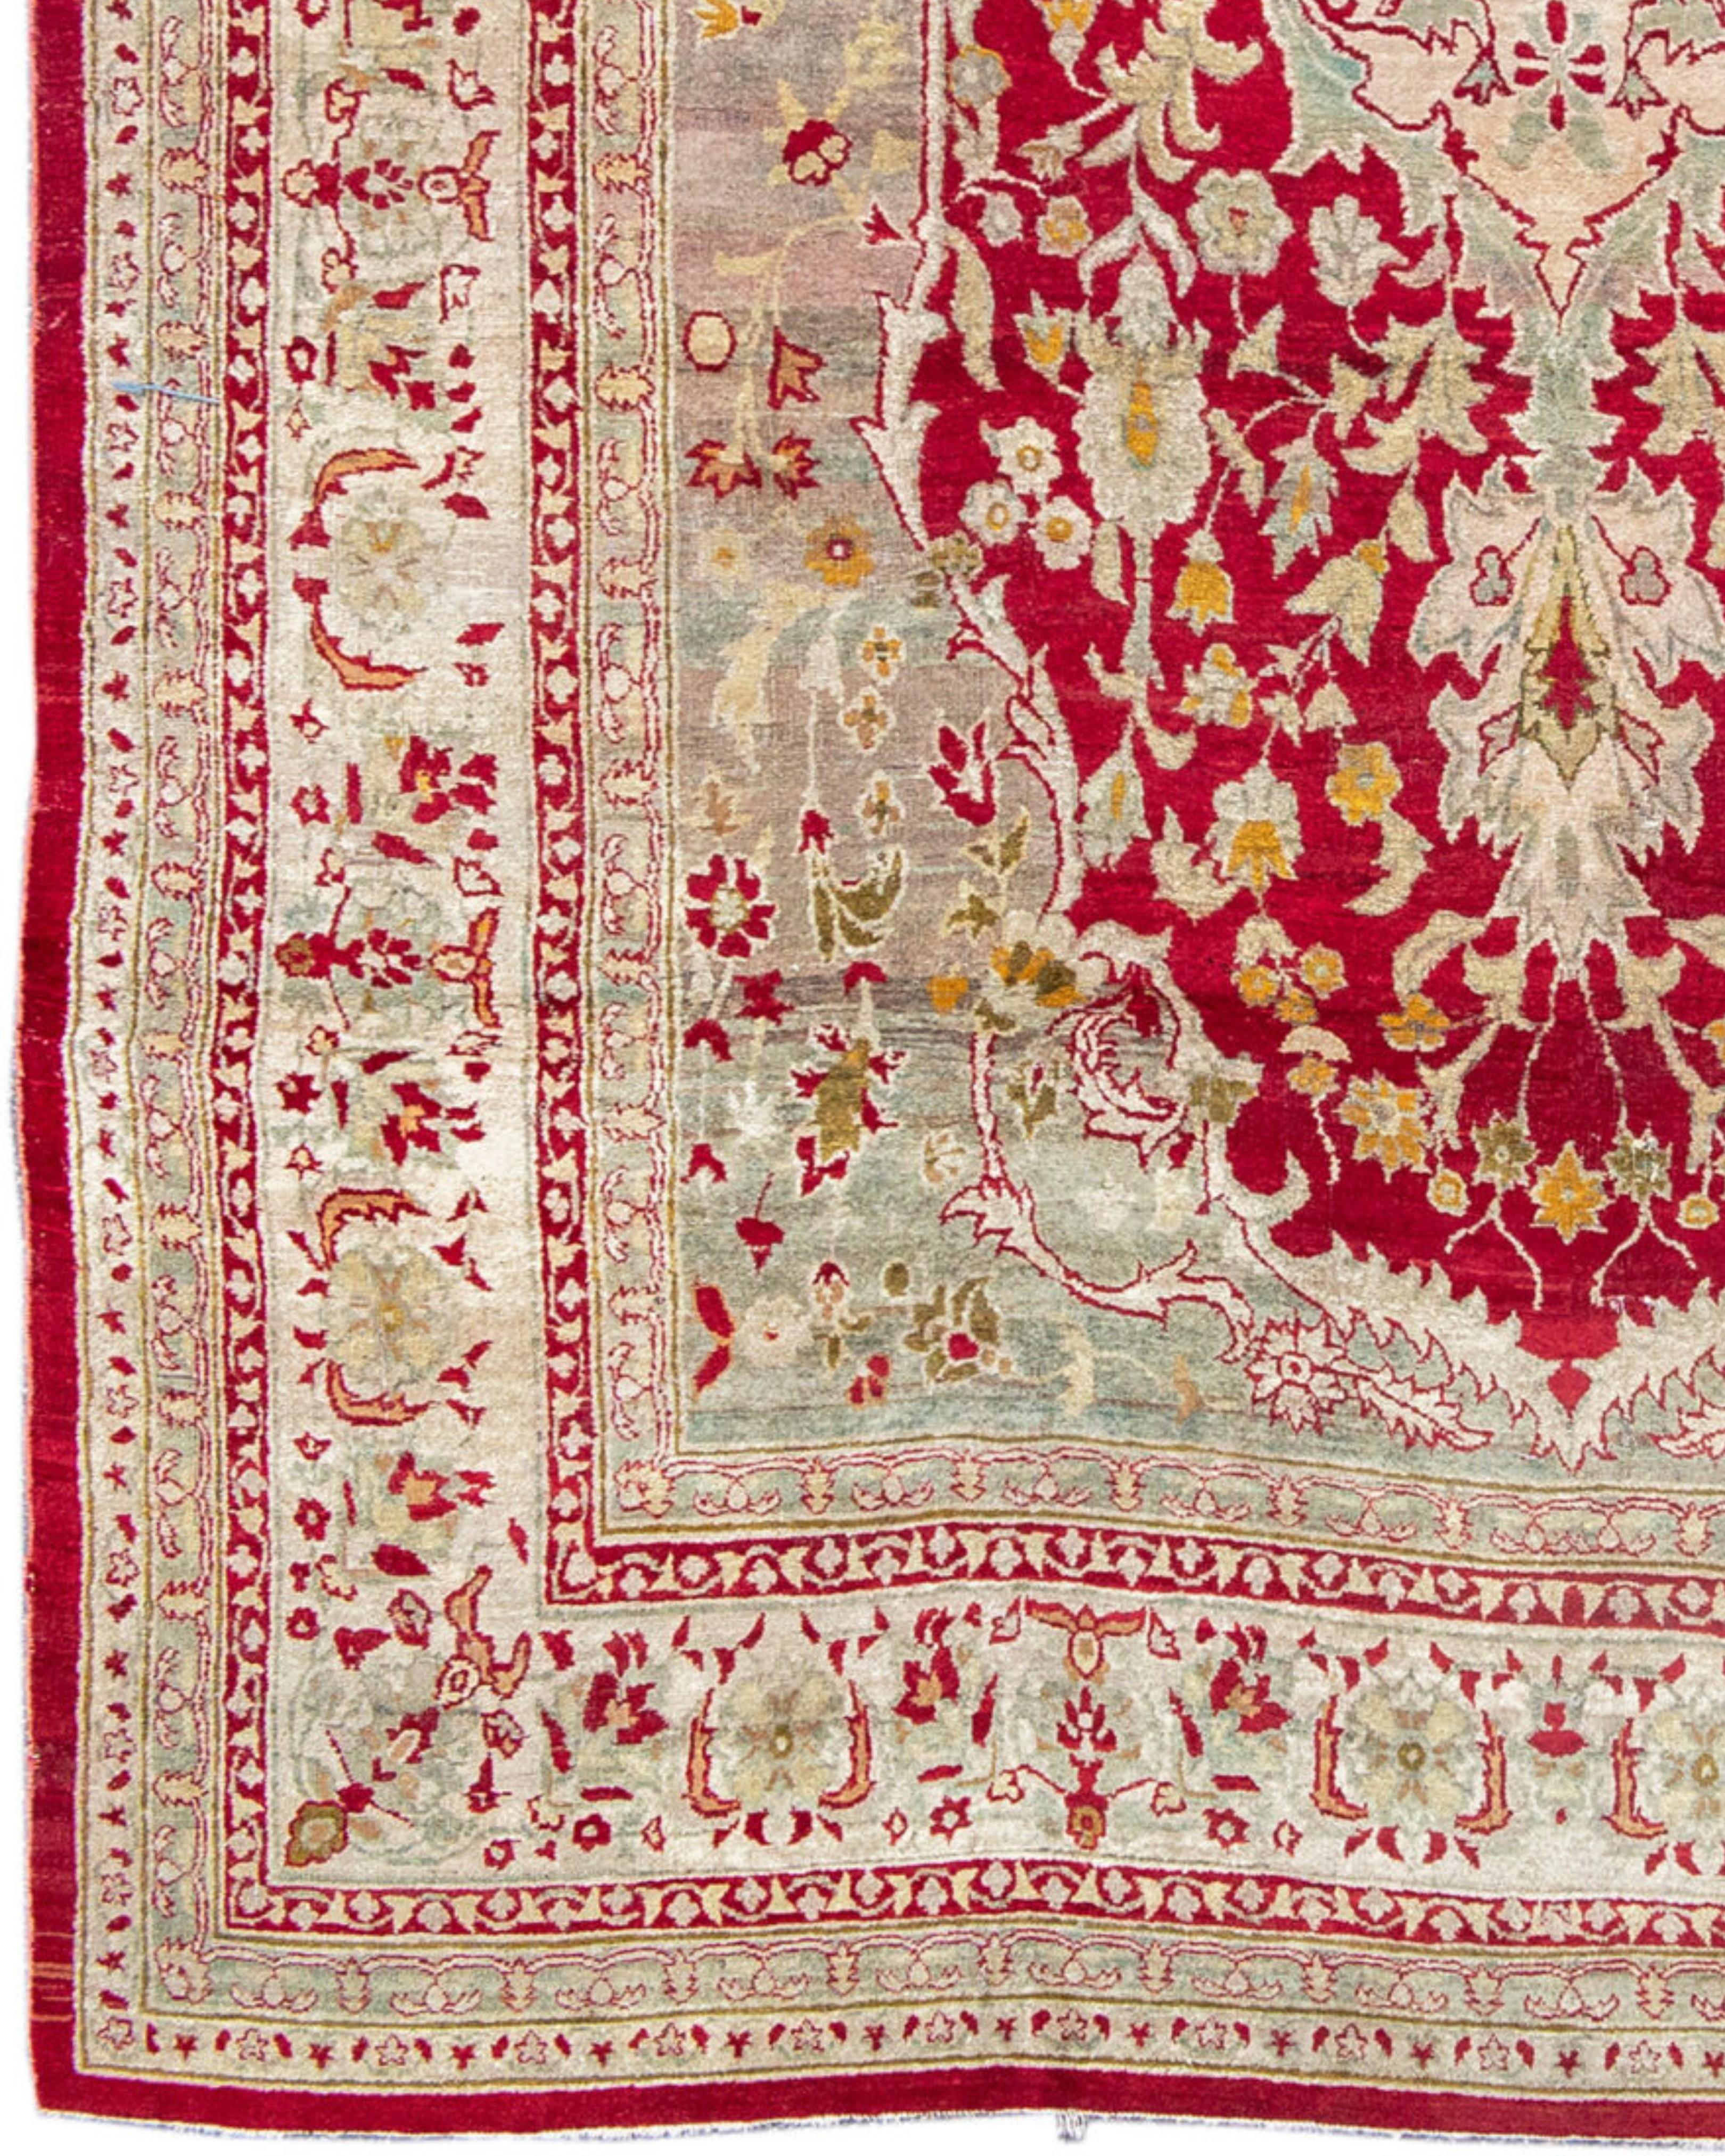 Hand-Knotted Antique Red and Gold Indian Agra Carpet, Late 19th Century For Sale